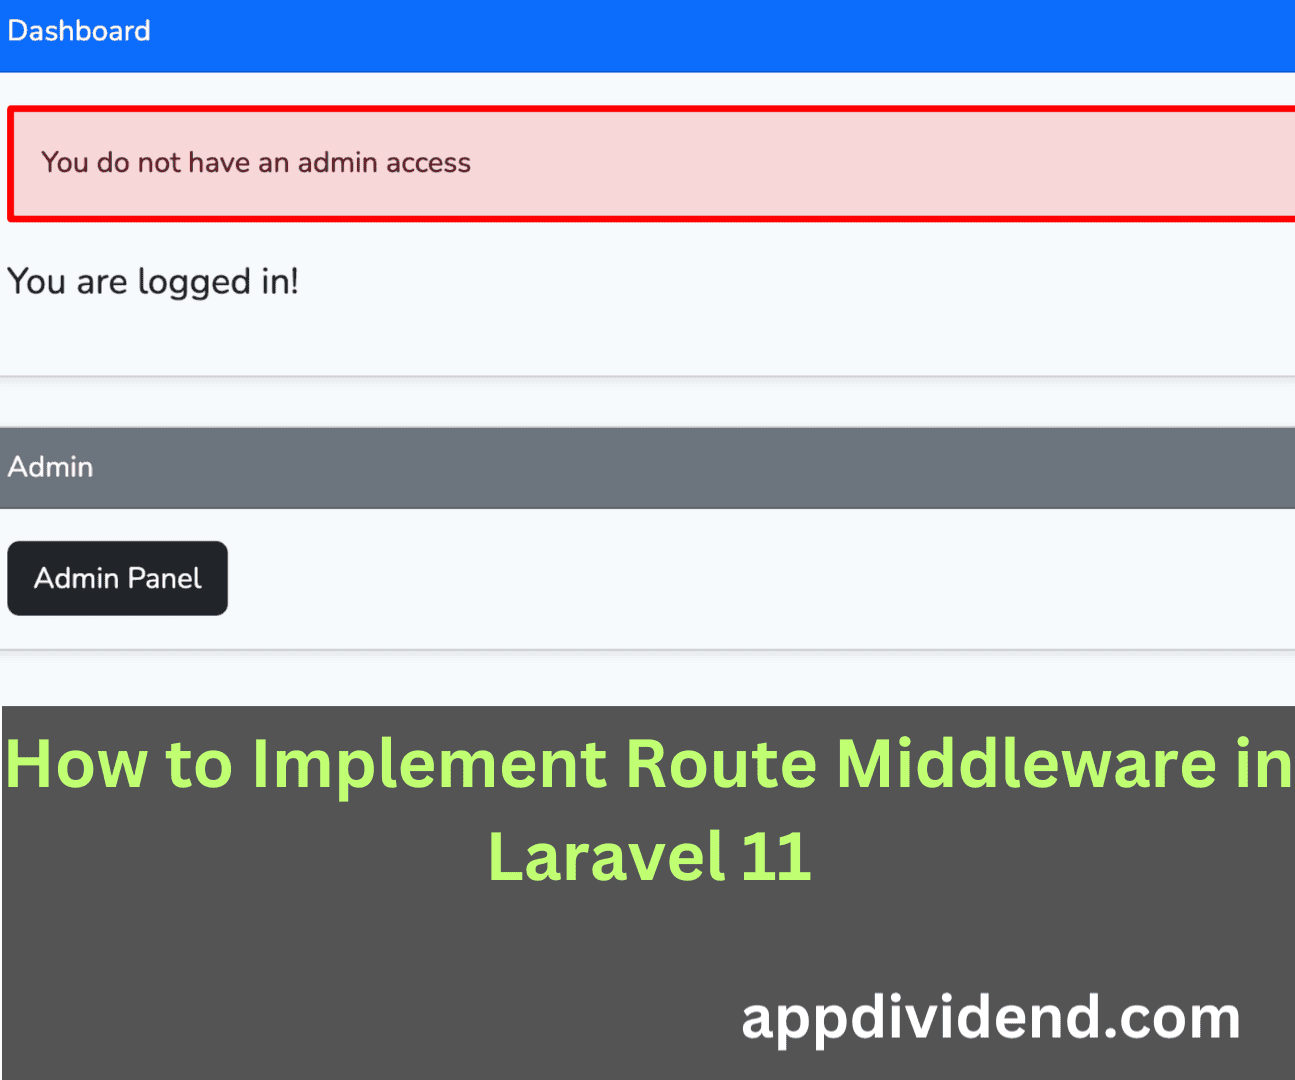 How to Implement Route Middleware in Laravel 11